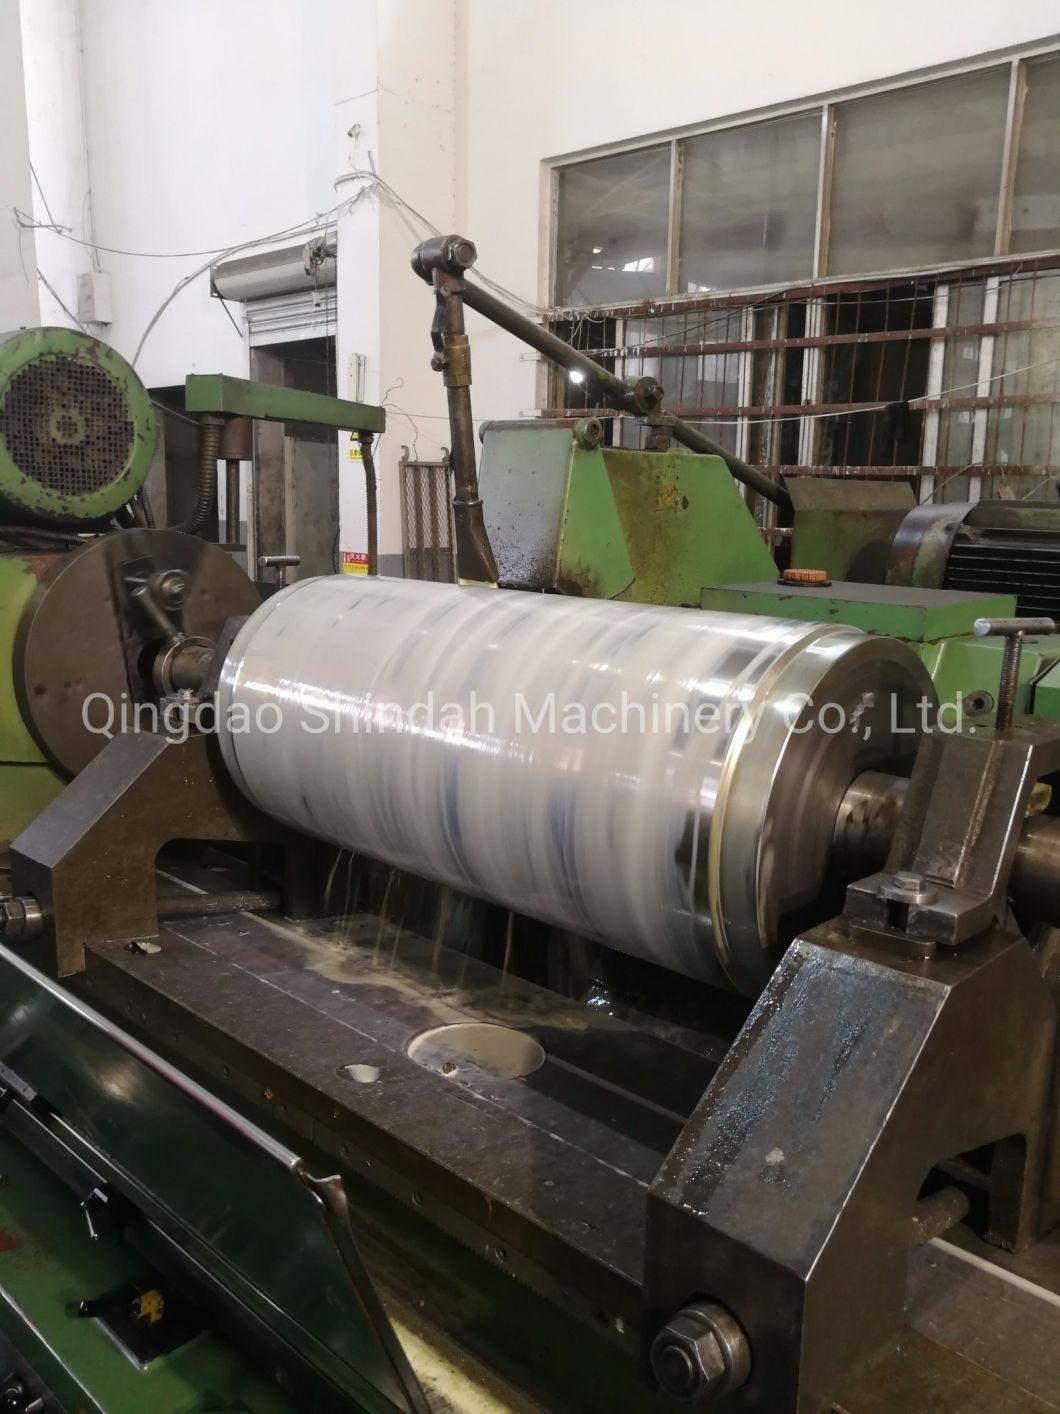 Three Roller Grinder for Grease